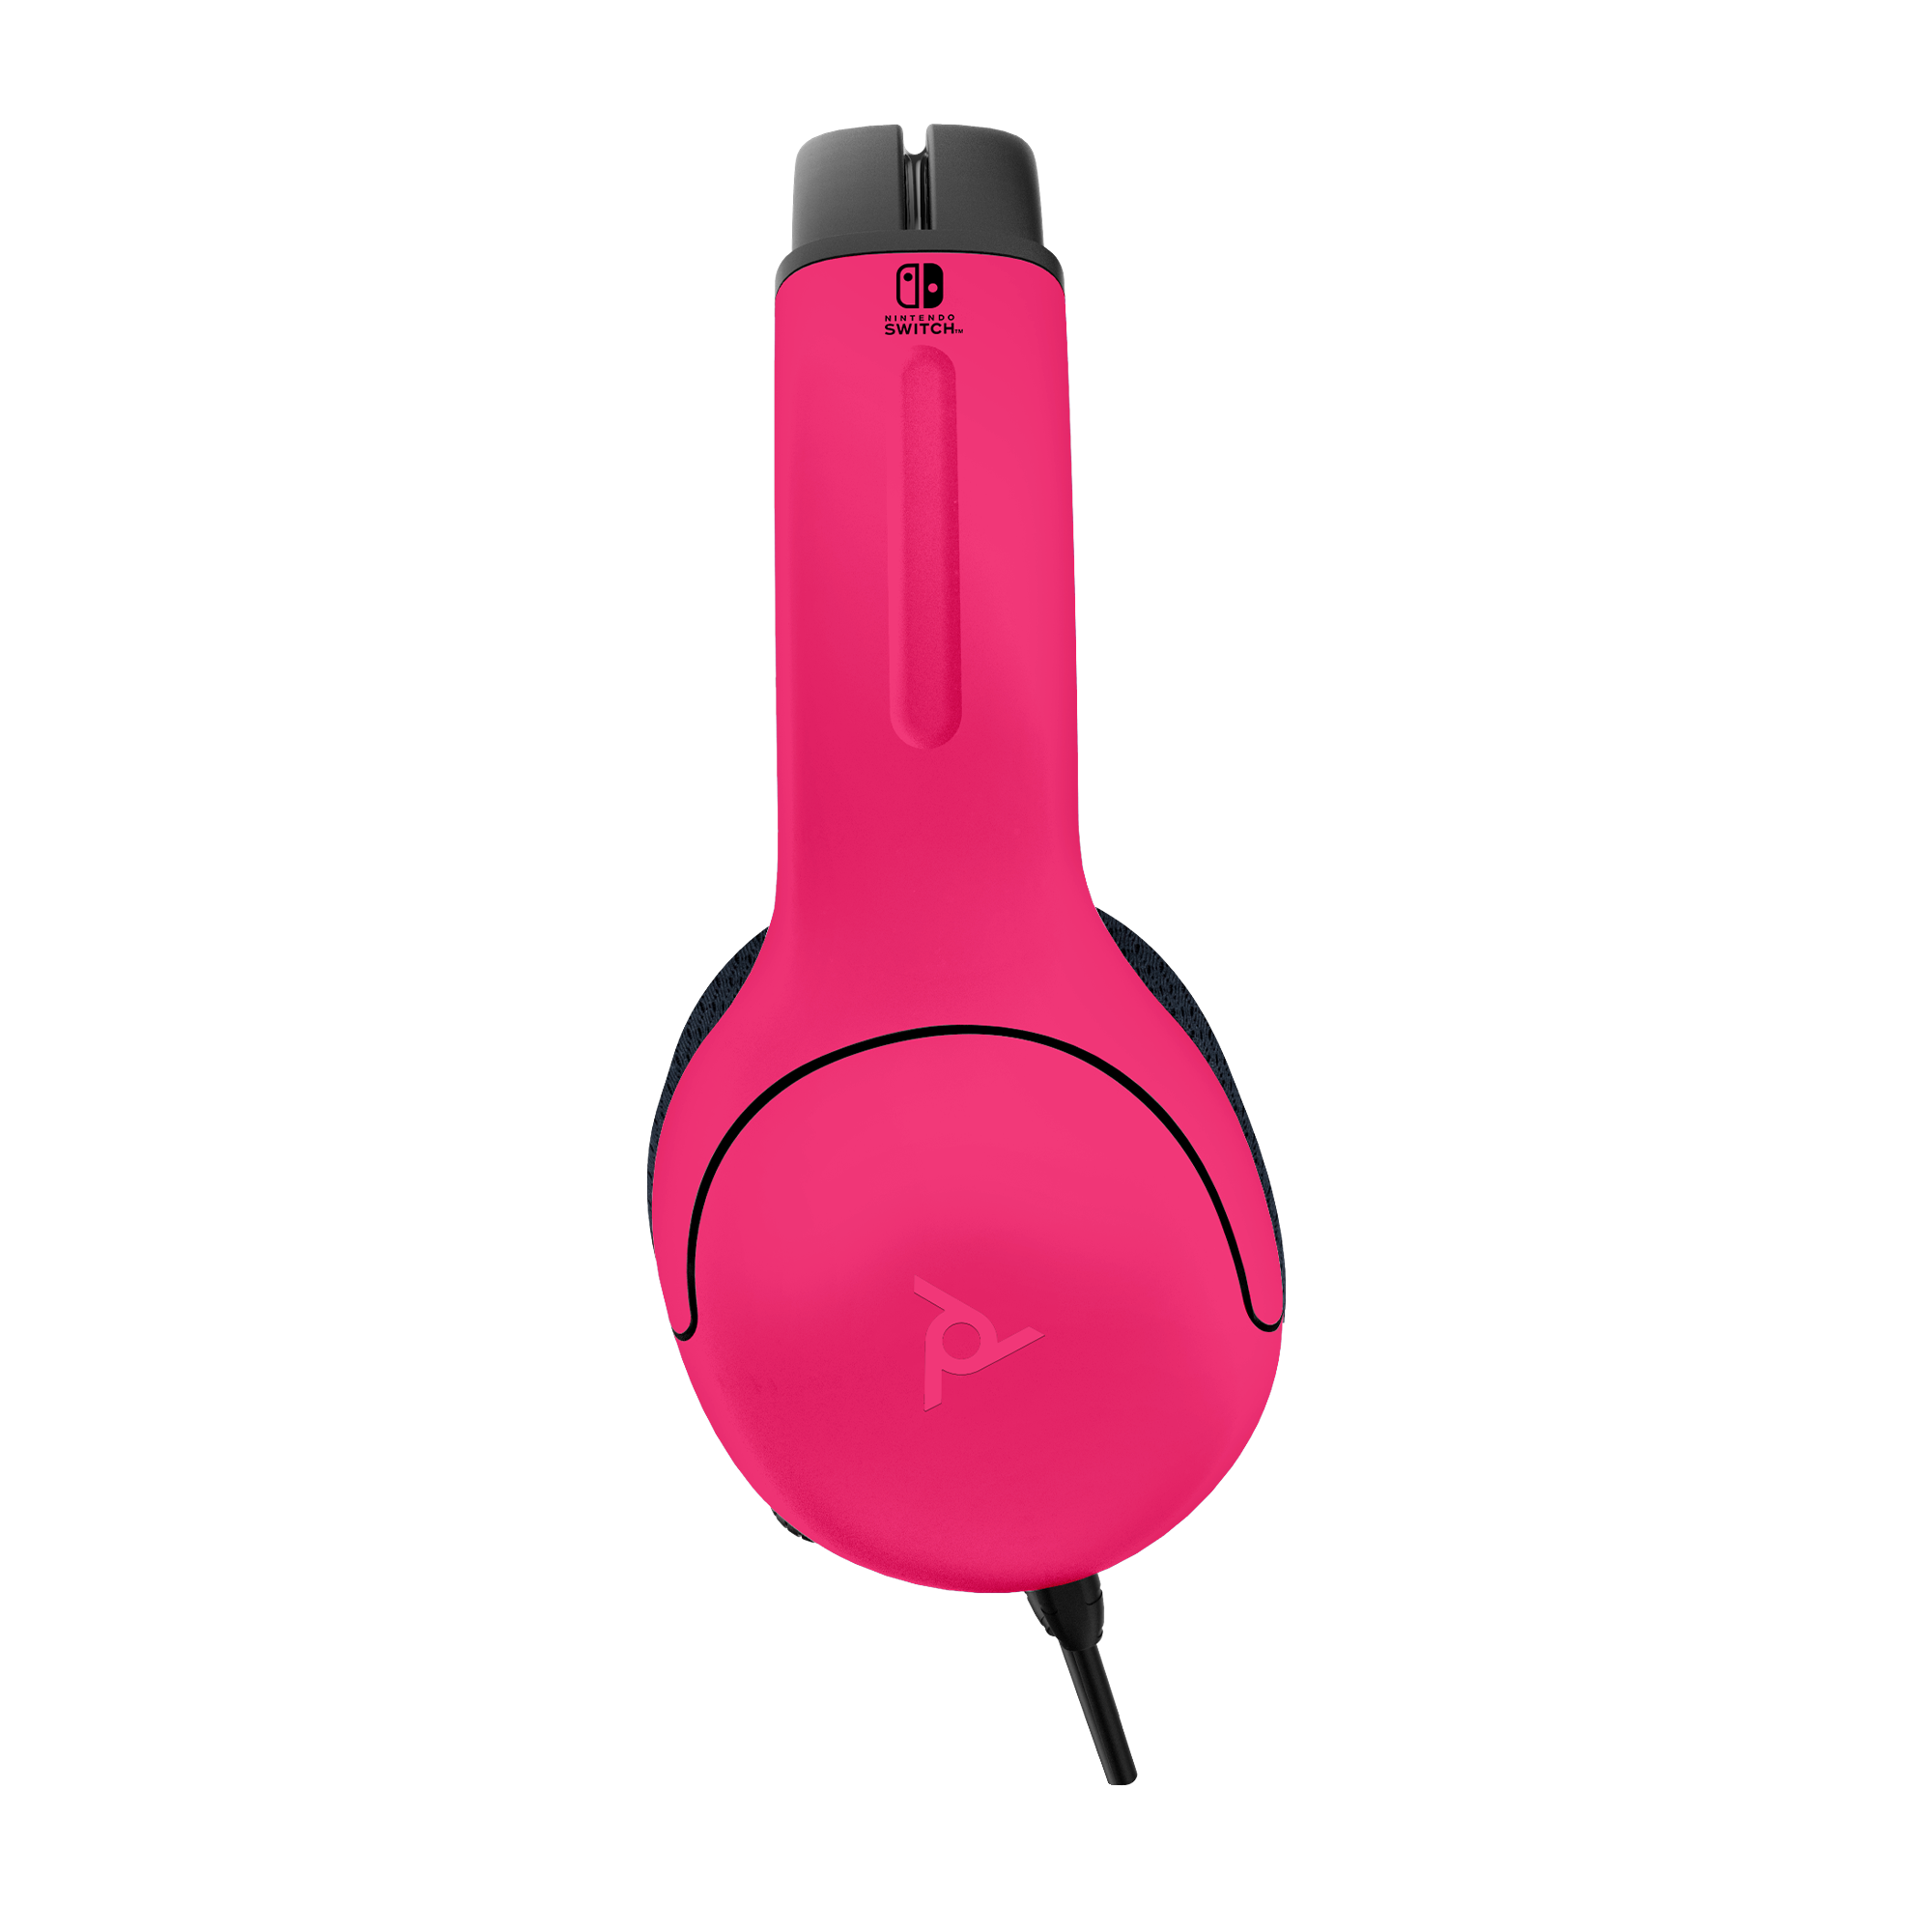 Pdp Gaming Lvl40 Wired Stereo Gaming Headset: Neon Pop - Nintendo